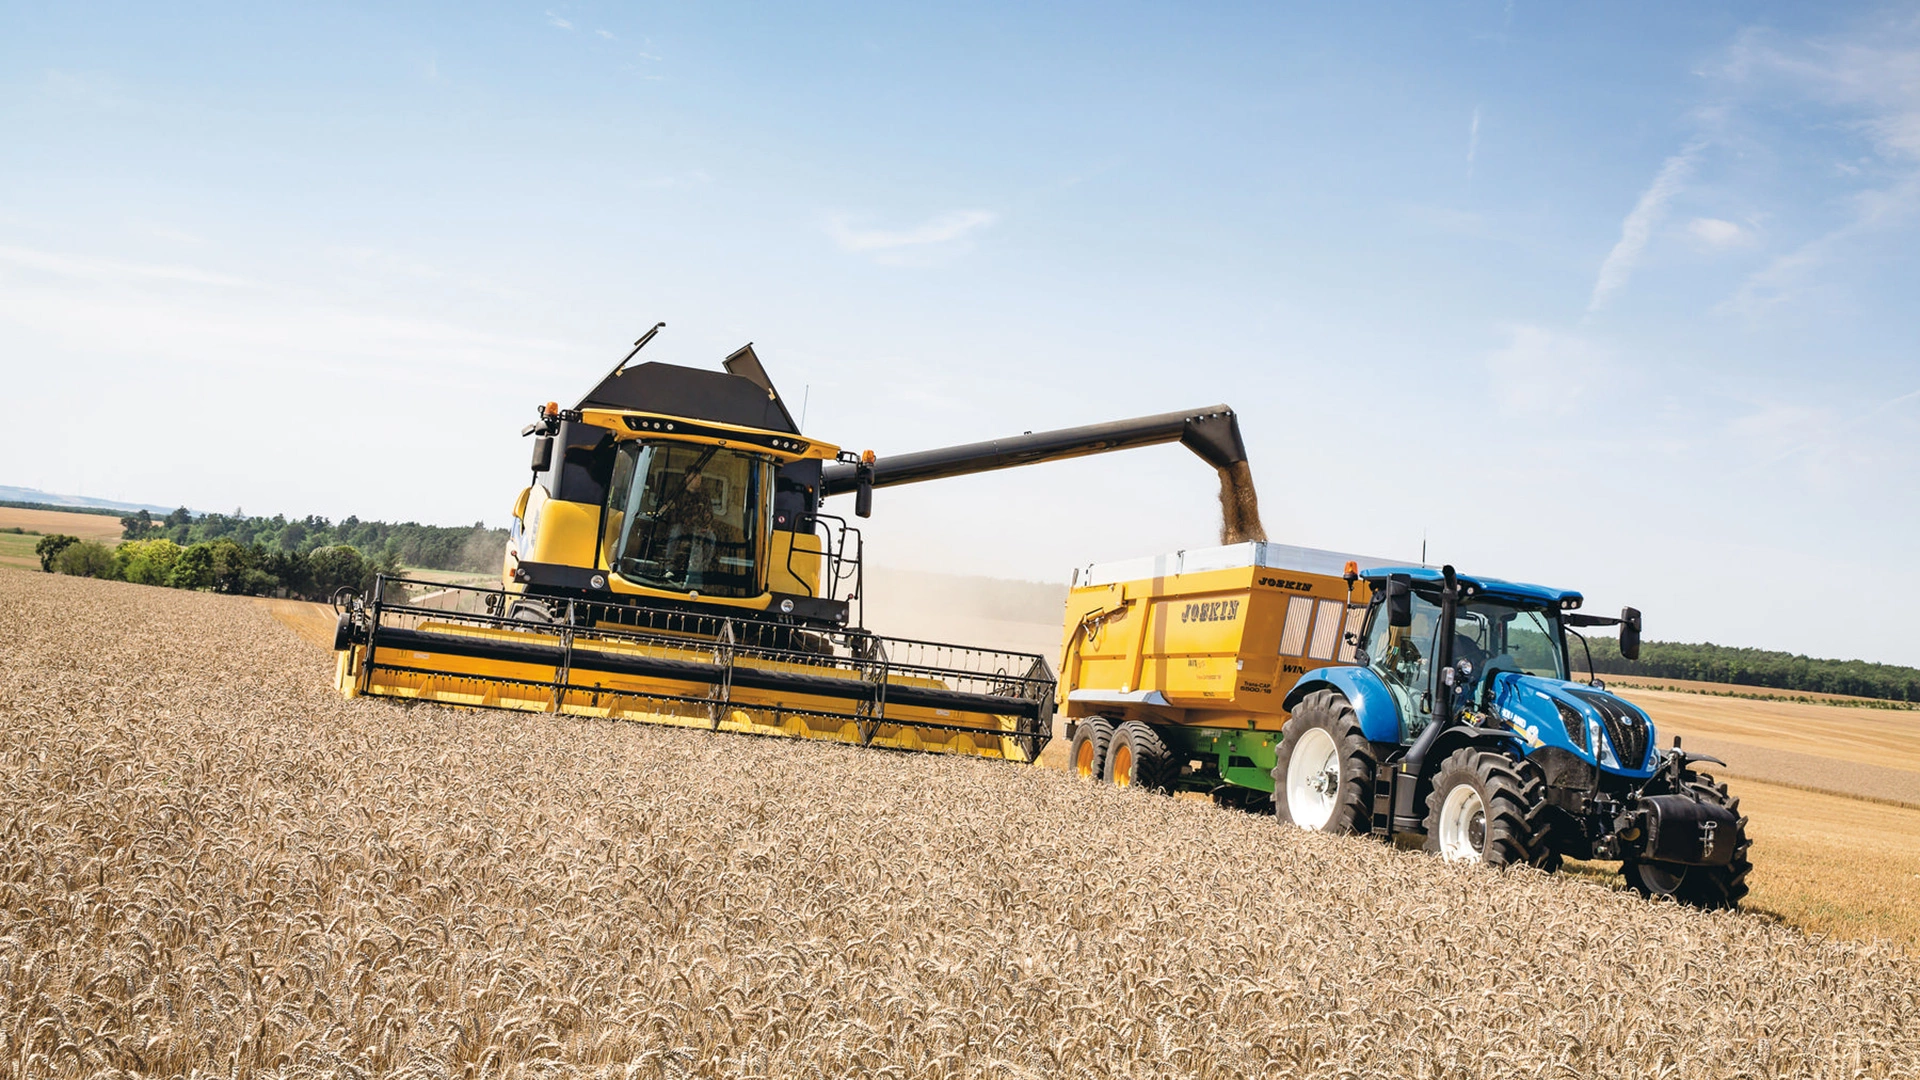 New Holland CH Combine Harvester working in a field, unloading grain into a trailer pulled by a blue tractor, under a clear sky.